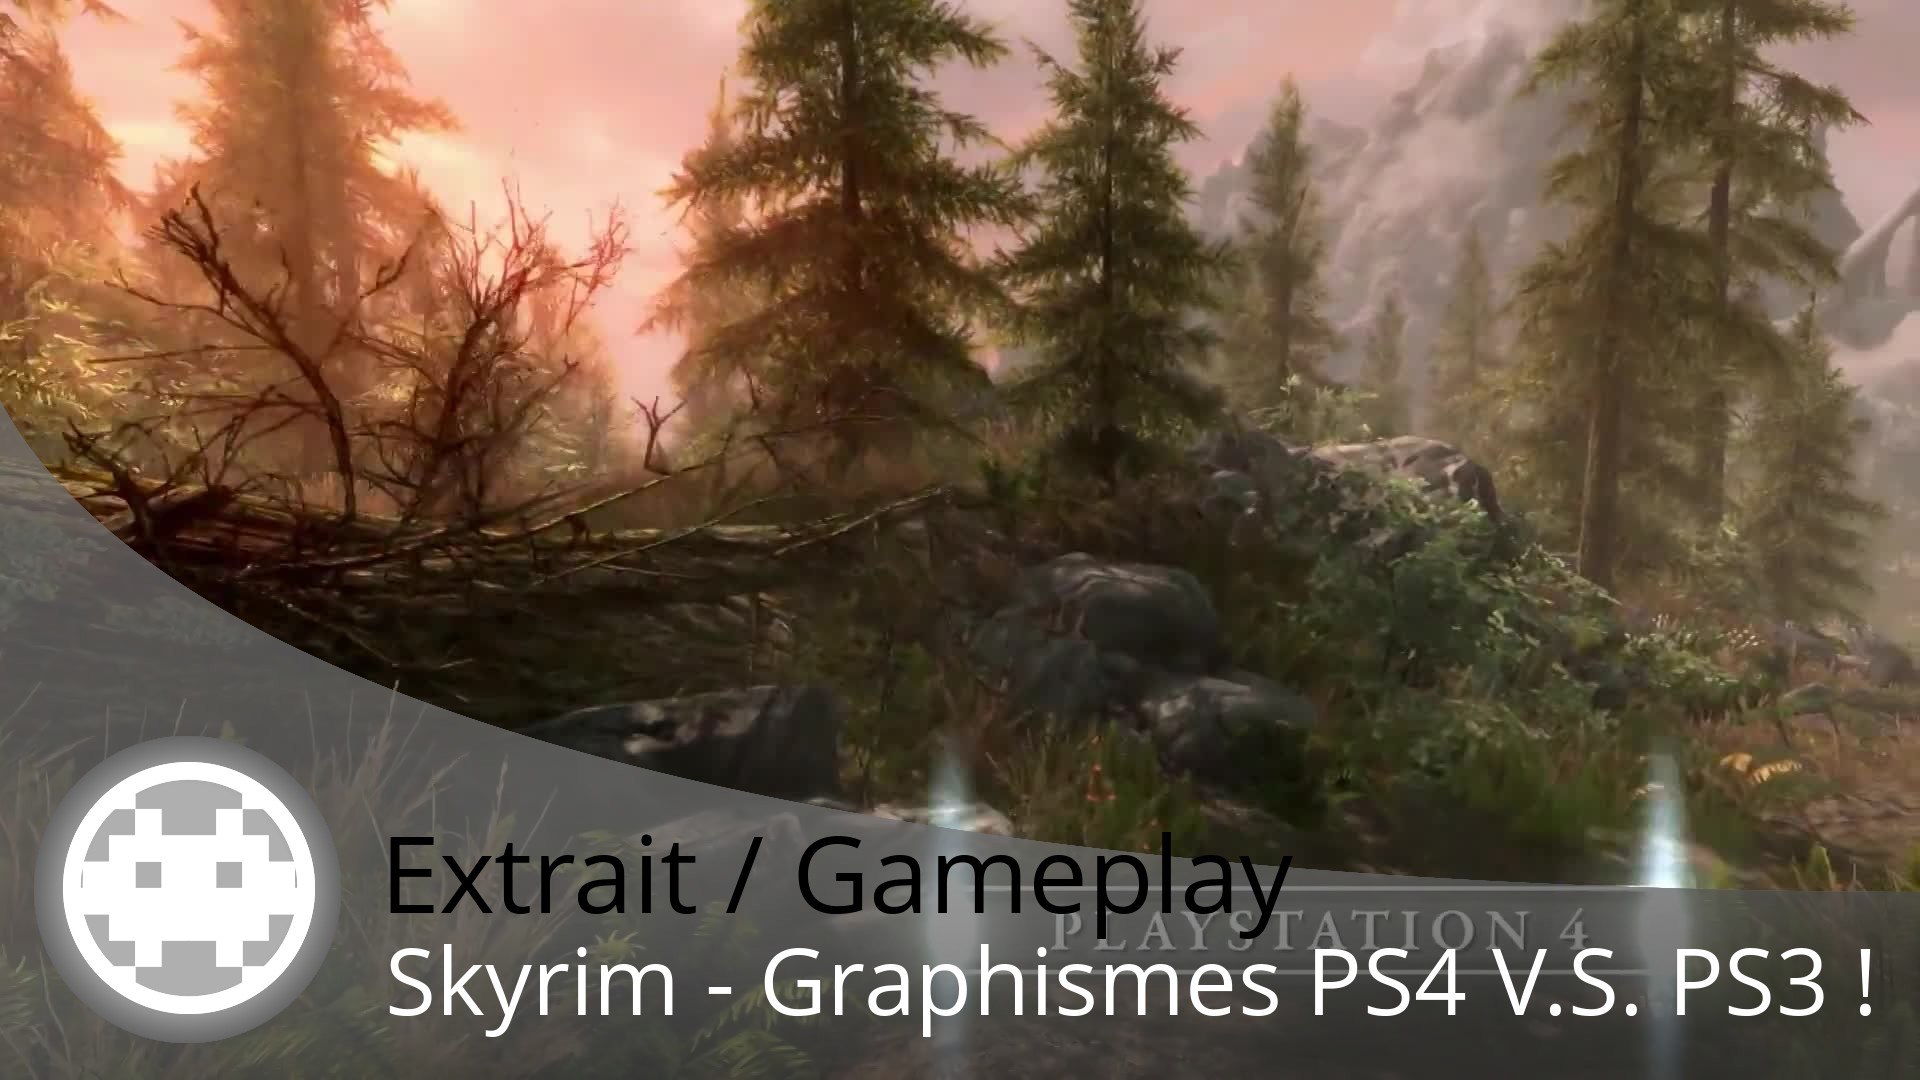 Extrait / Gameplay - Skyrim (Comparaison Graphismes PS4 V.S. PS3 !) - Vidéo  Dailymotion